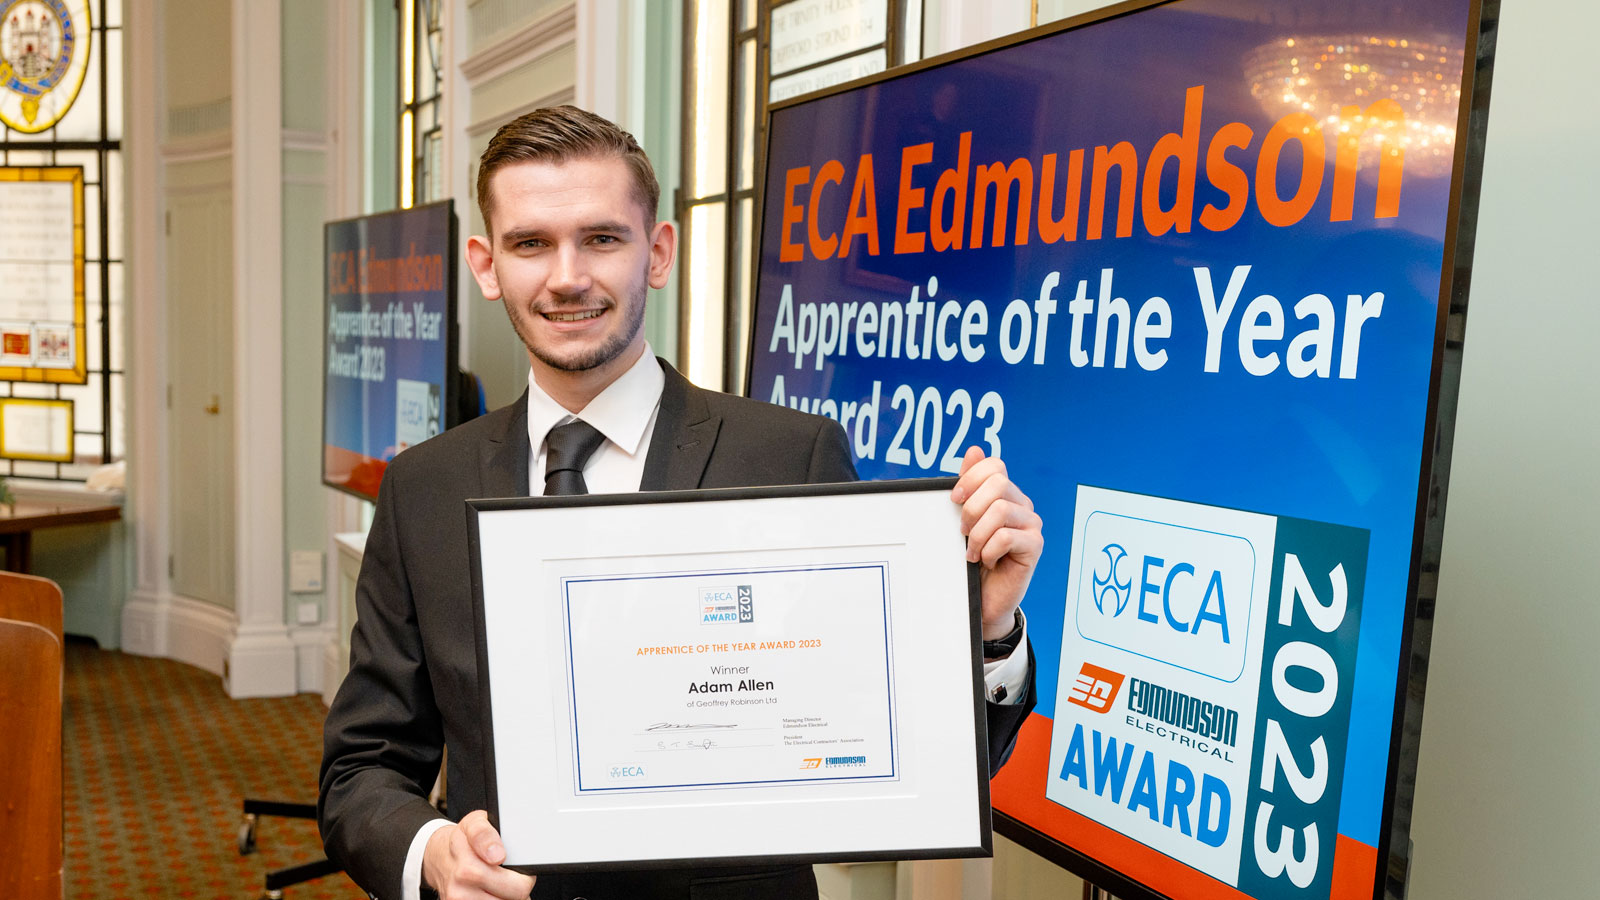 Adam Allen, from Teesside-based electrical contracting business Geoffrey Robinson Ltd, took home the 2023 ECA Edmundson Apprentice of the Year Award.